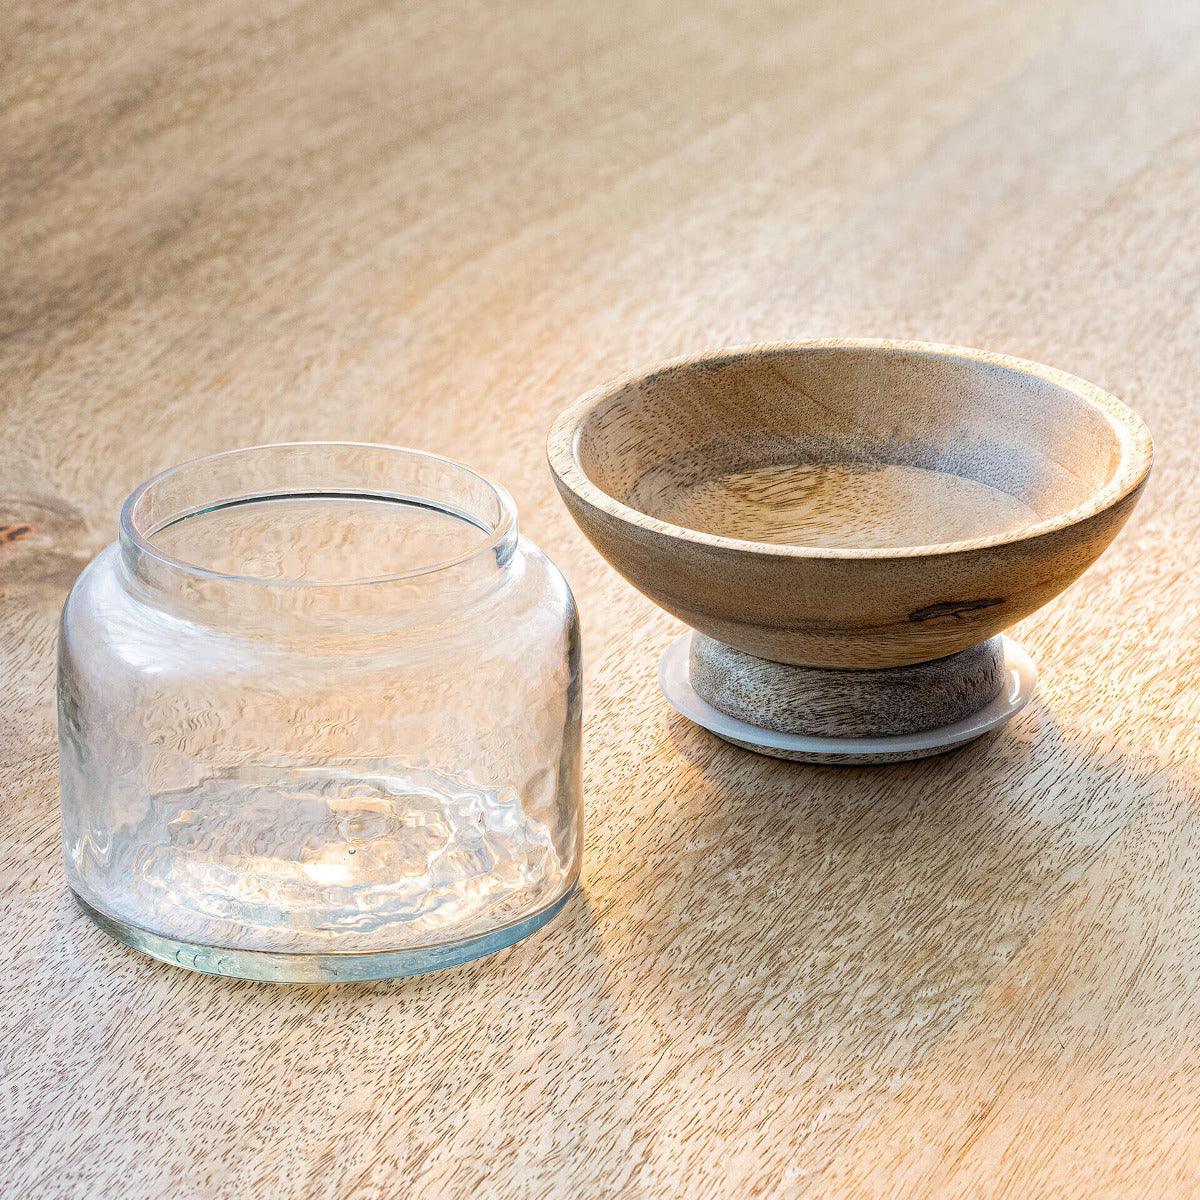 Twain Glass Jar with Wooden Bowl (small)